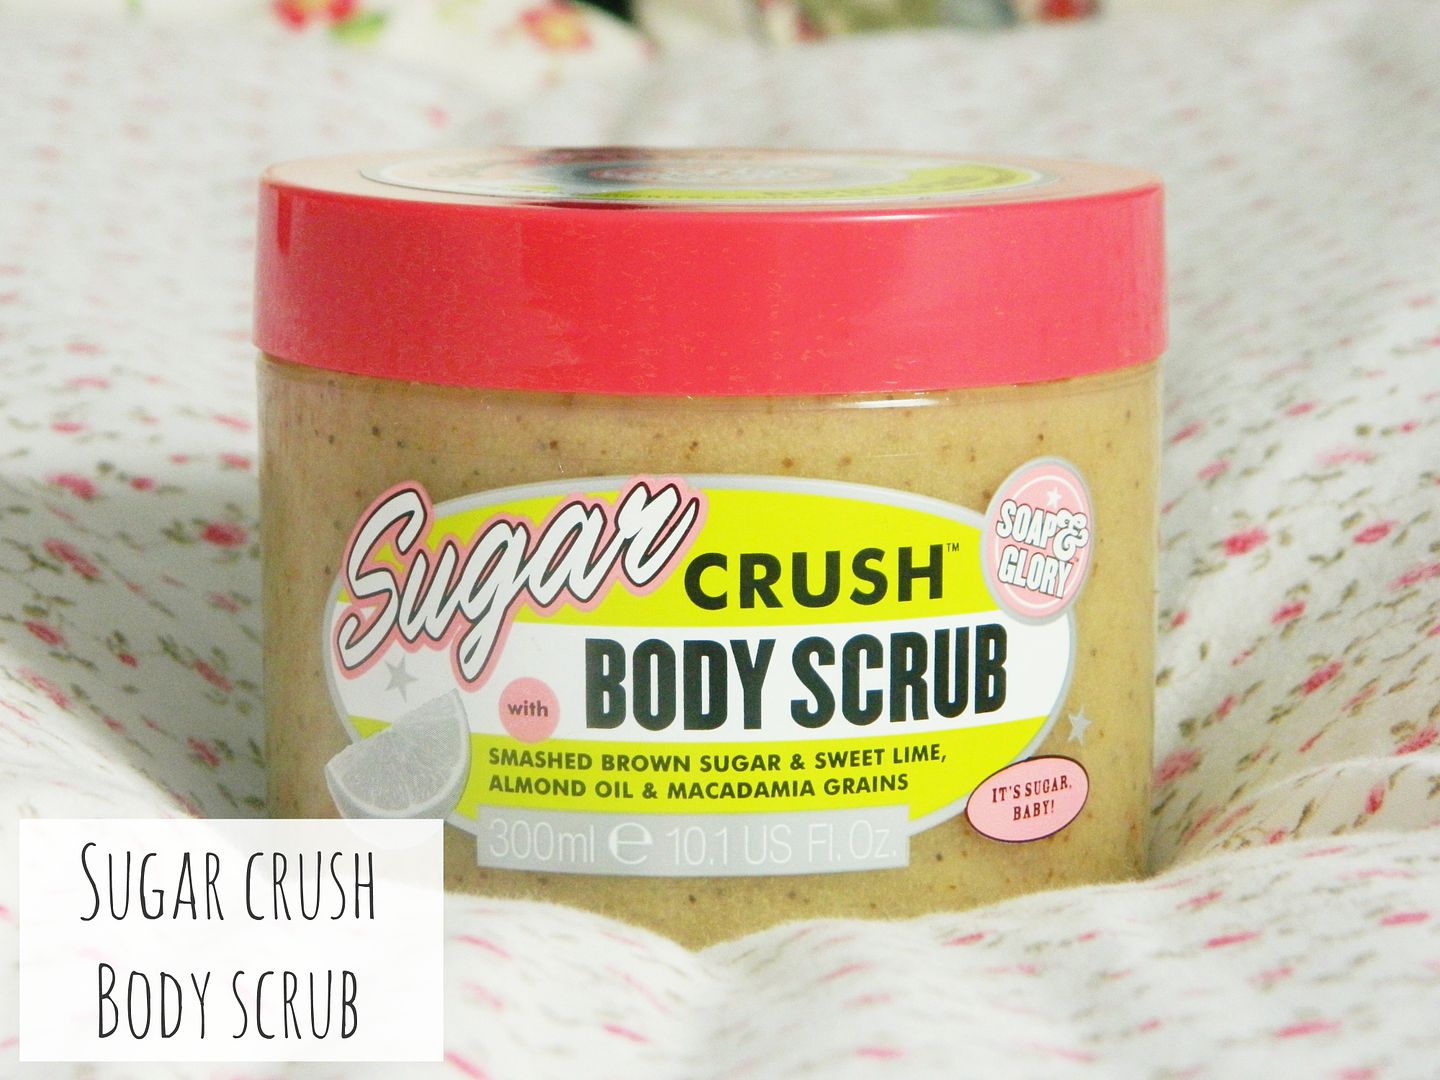 Soap And Glory Sugar Crush Collection Body Scrub Review Belle-amie UK Beauty Fashion Lifestyle Blog